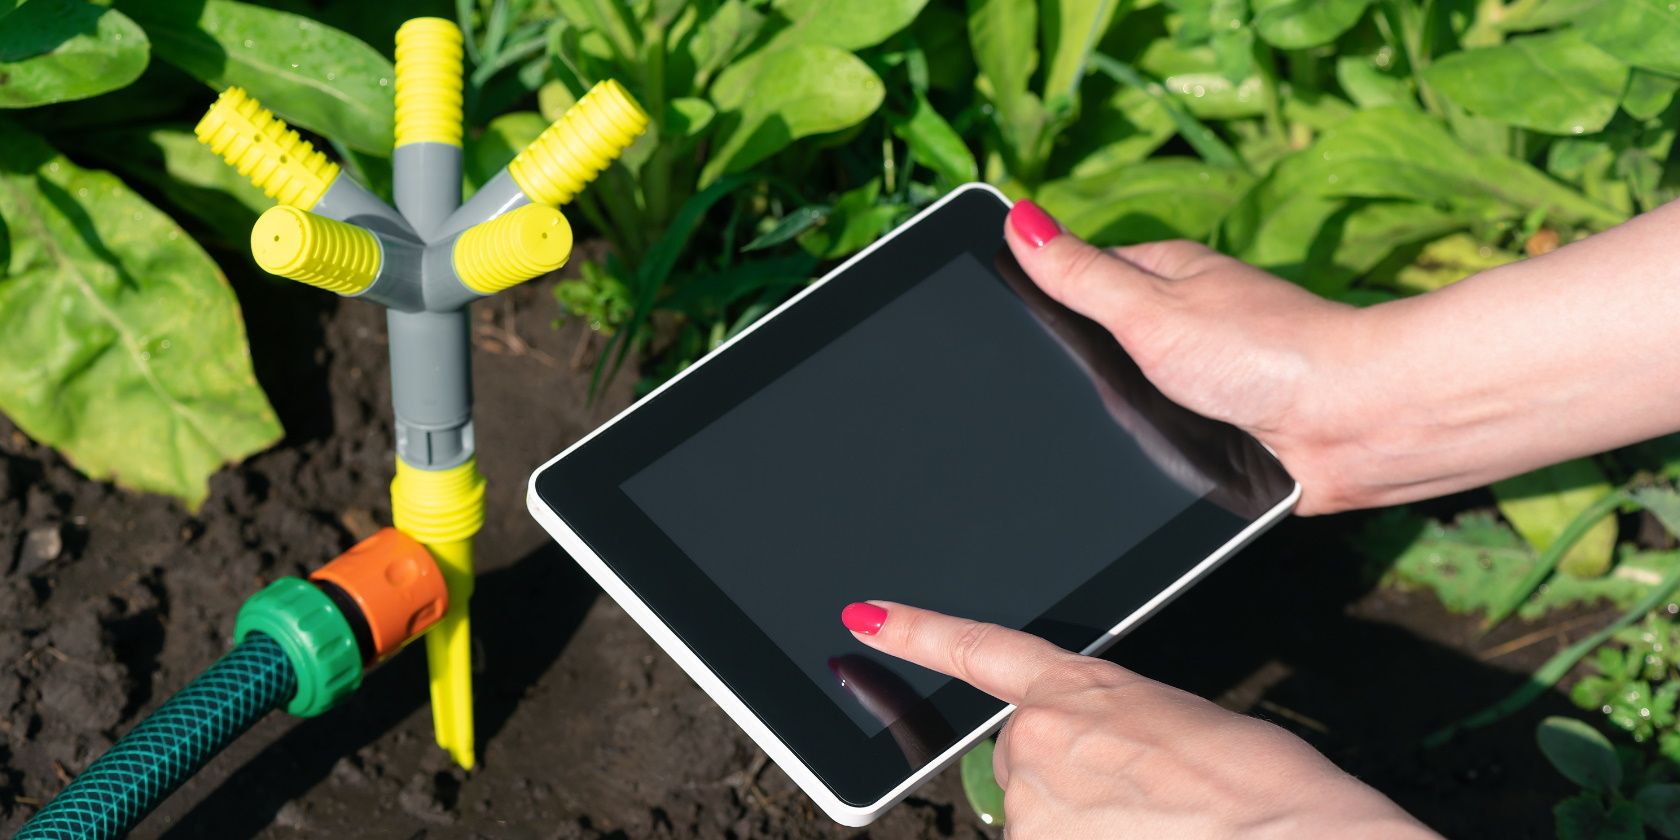 Two hands holding a tablet device next to a garden sprinkler system